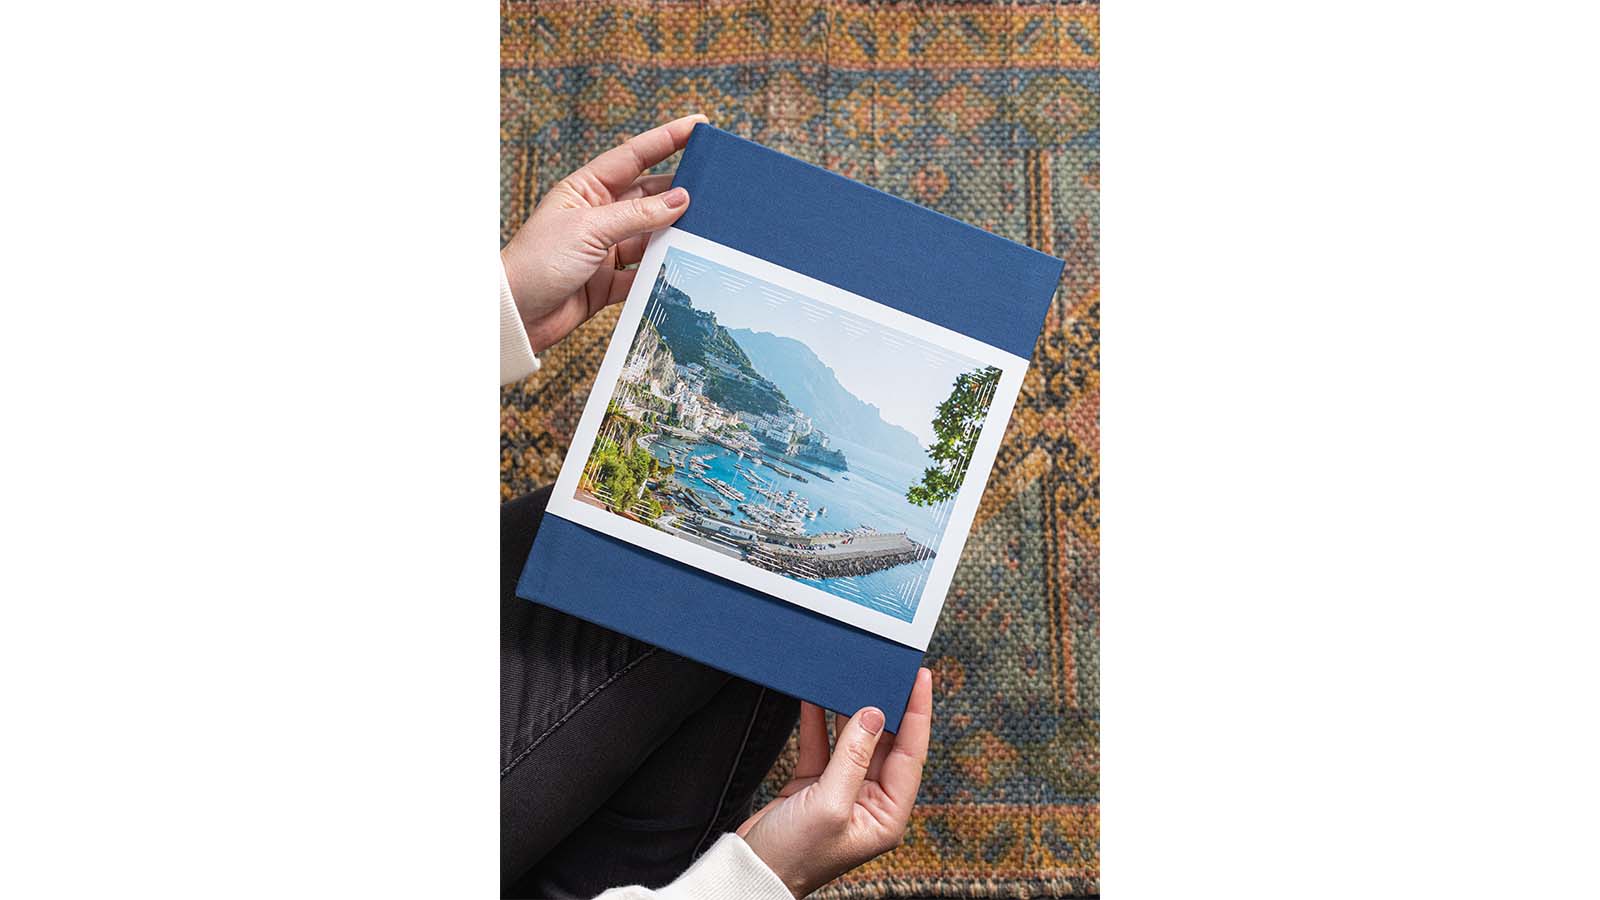 Photo Books:Preserving Travel Memories - The World Is A Book